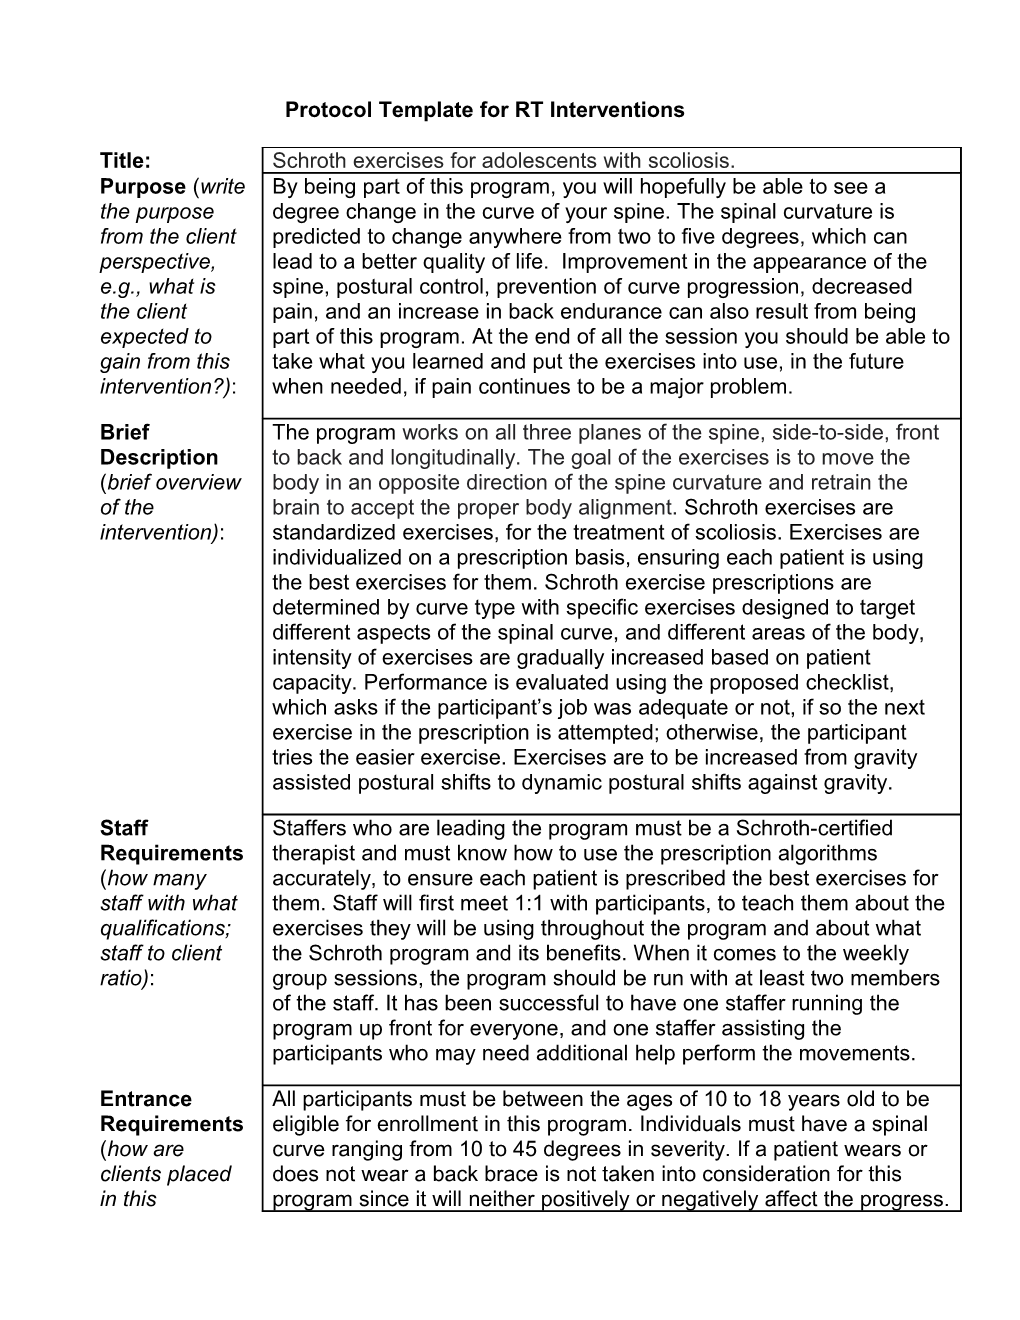 Protocol Template for RT Interventions